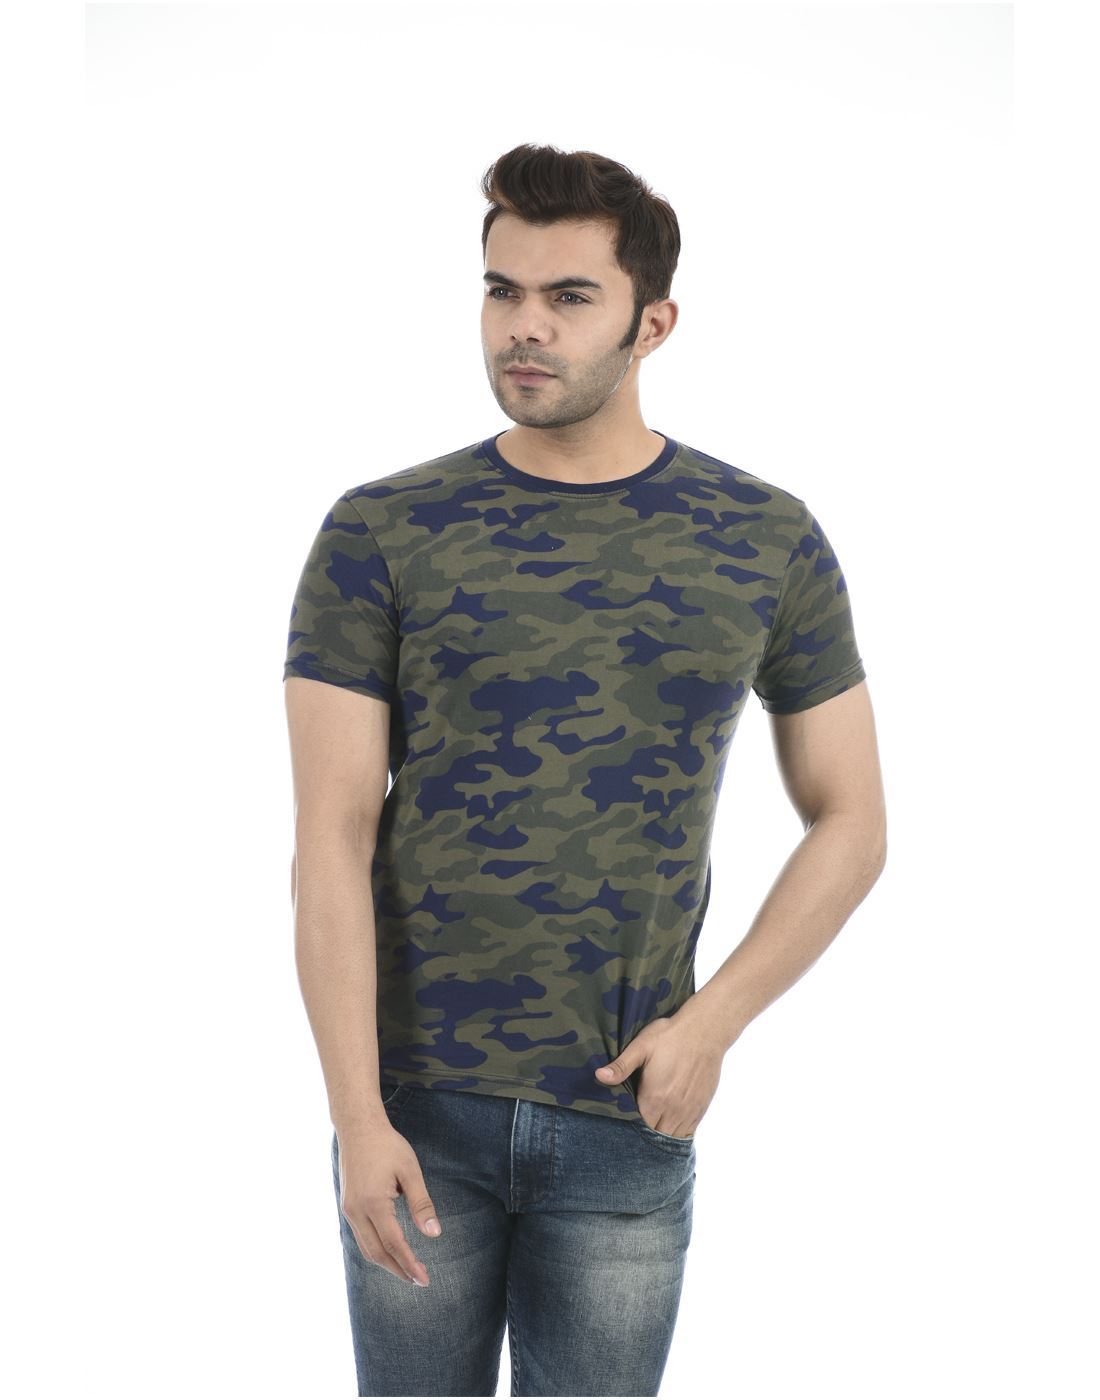 Jeans Wear | 152390 Blue T-Shirt Blue Casual | Men Pepe Military Camouflage